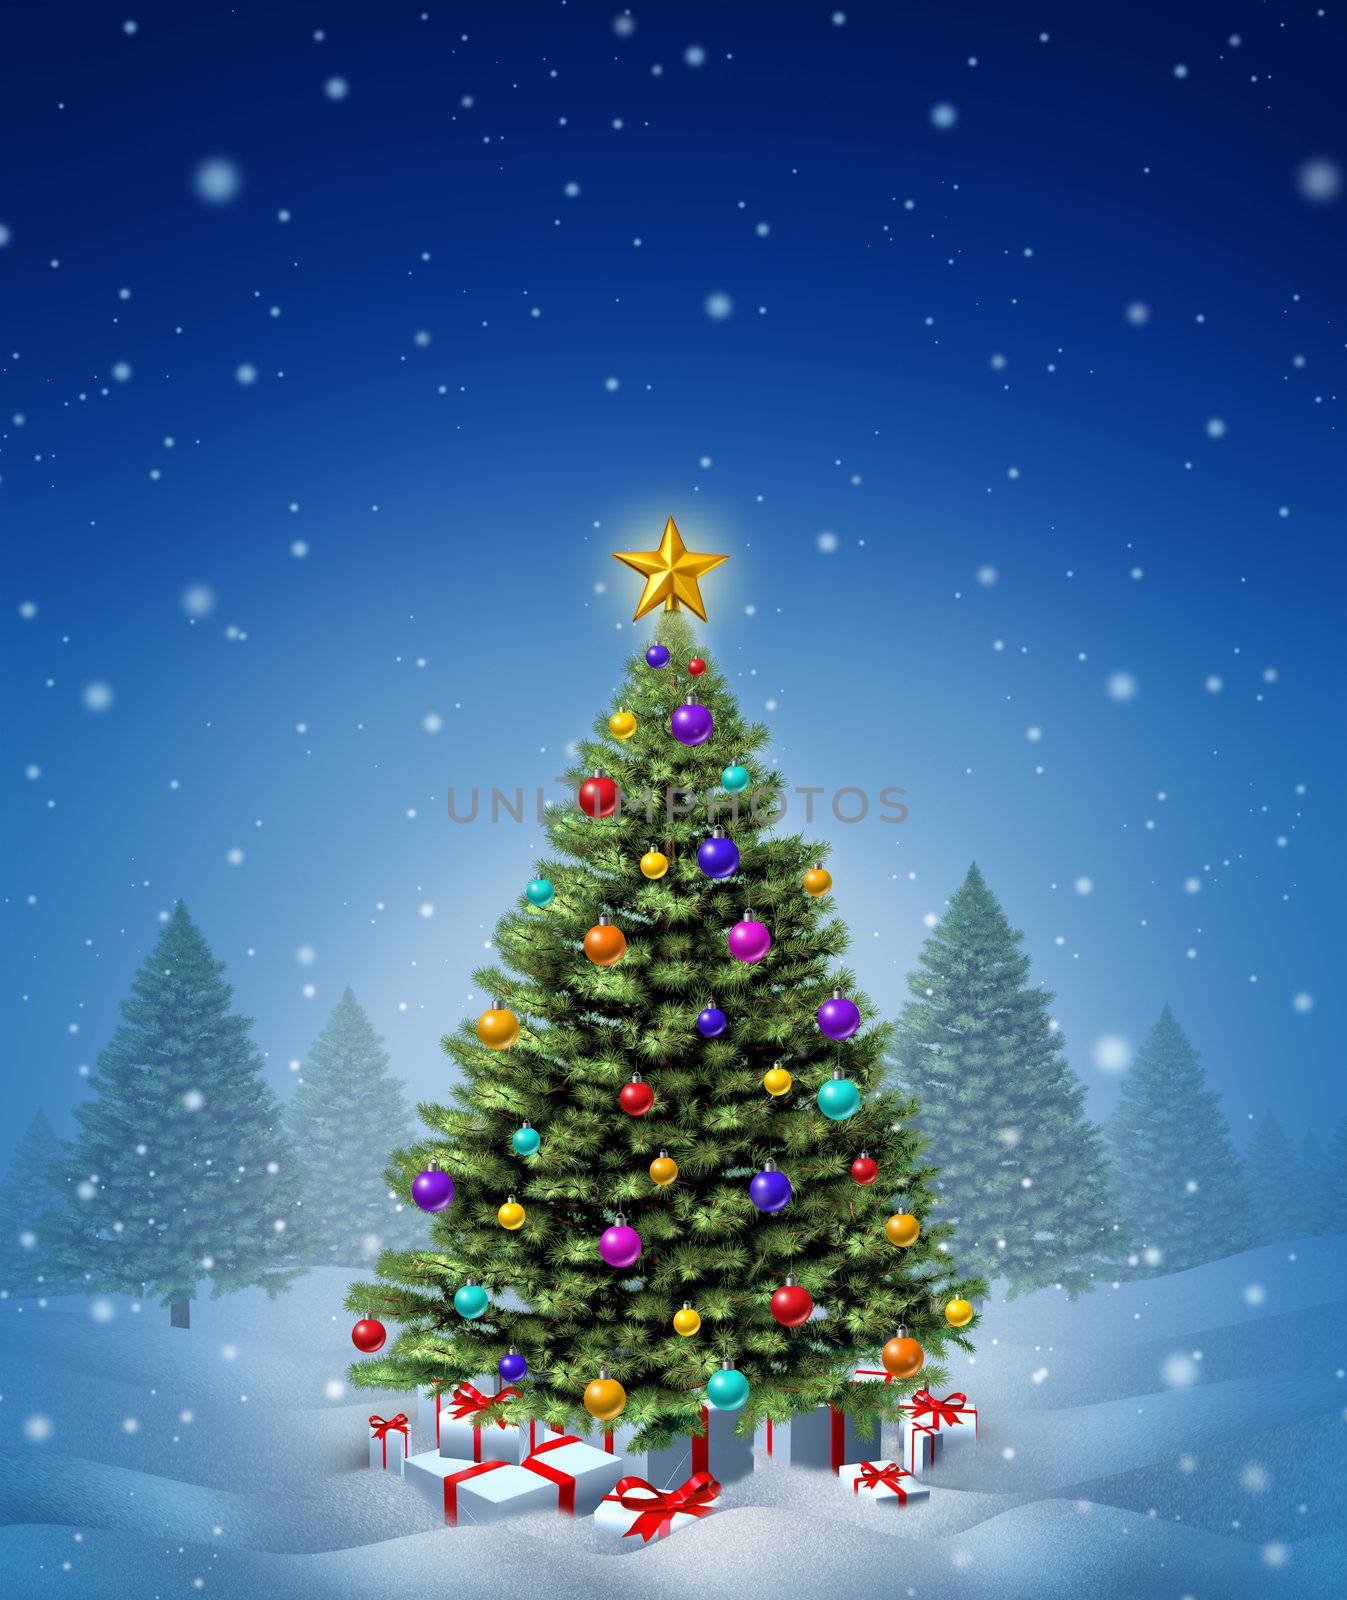 Christmas winter tree decorated with ornate decorative balls and gifts with red ribbons and bows as a seasonal symbol of winter celebration and festive new year on a cold snowing night.